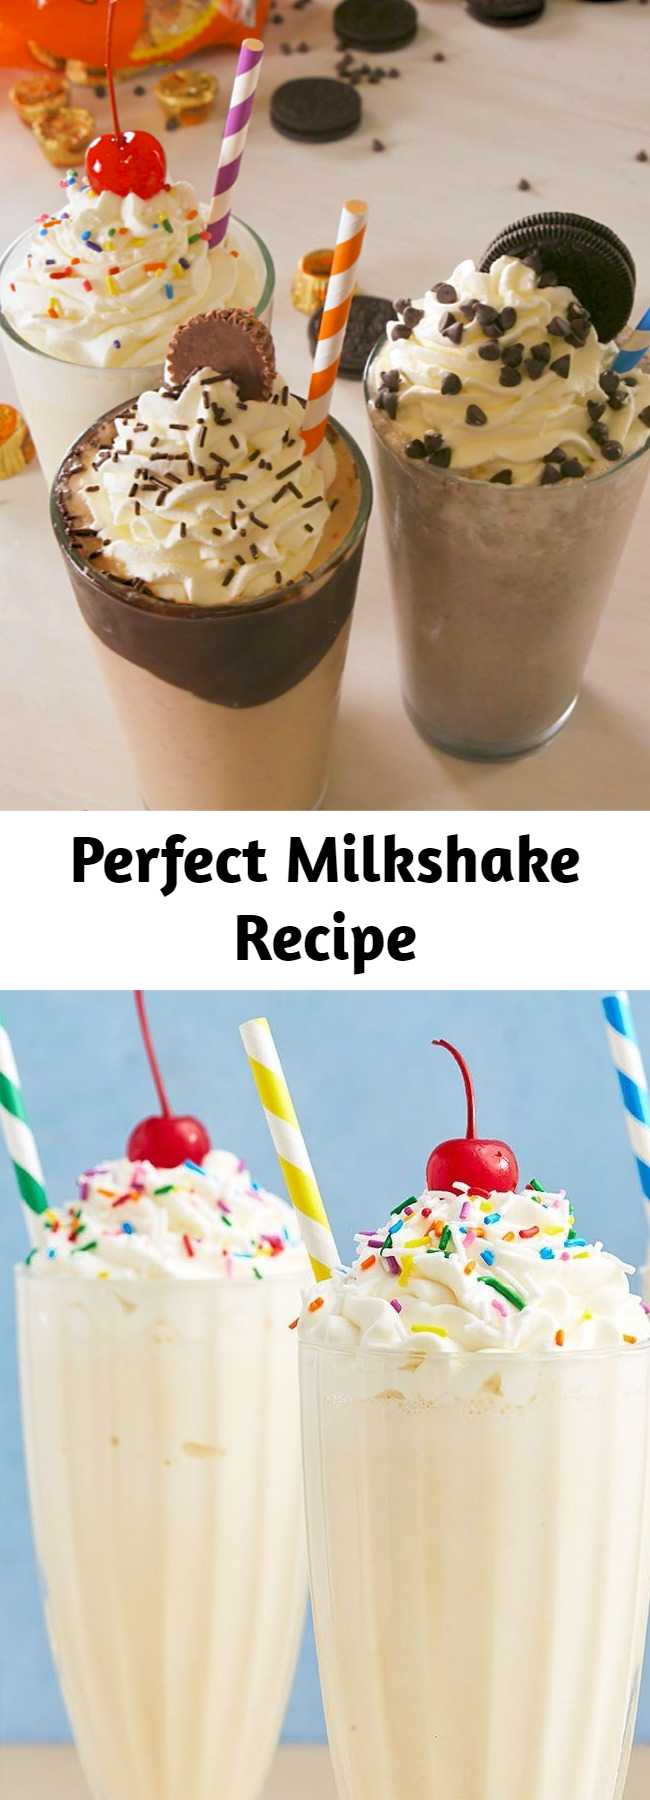 Milkshakes are the perfect novelty desserts and this milkshake is the perfect milk to ice cream ratio. If you prefer thicker milkshakes either up the ice cream or decrease the milk. While your mix-in options are endless, we think the two below are pretty perfect. #easyrecipe #milkshake #drink #dessert #icecream